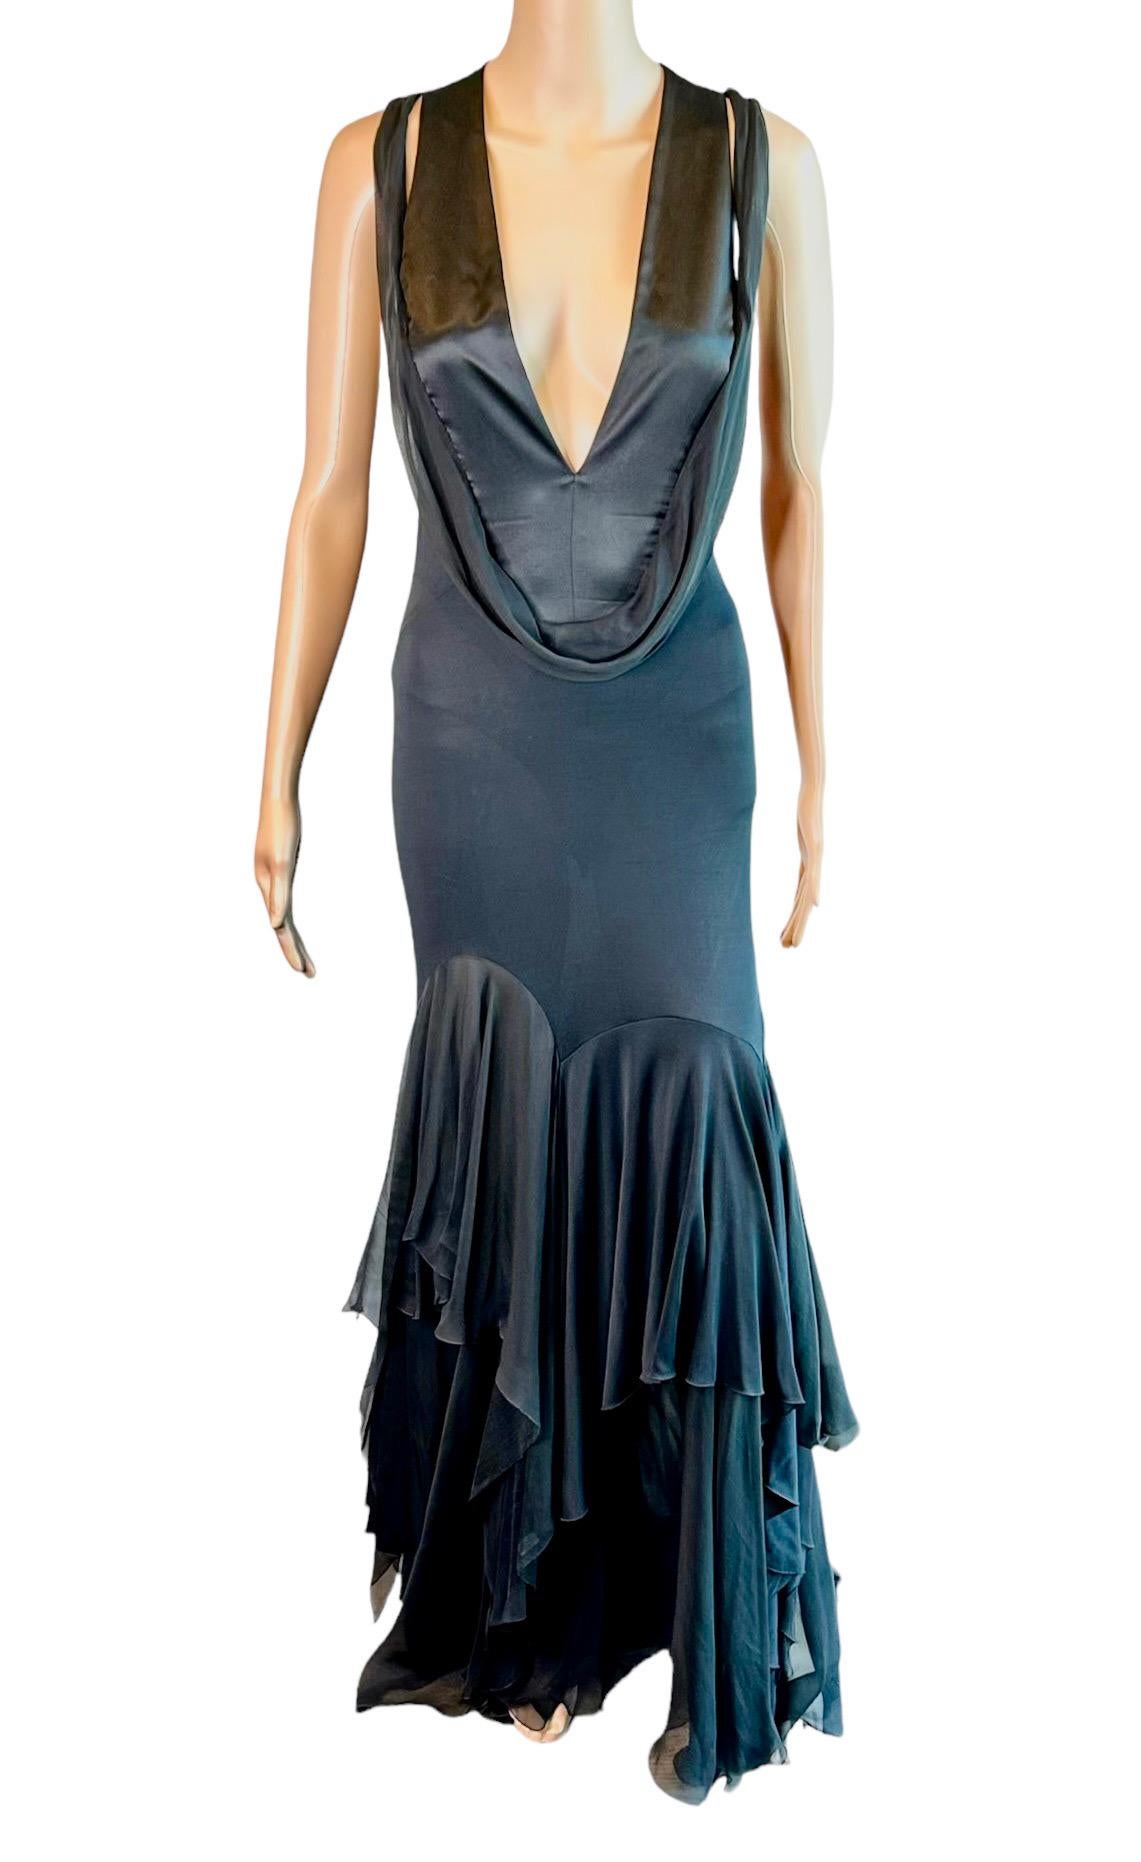 Versace S/S 2004 Plunged Halter Open Back Ruffles Black Evening Dress Gown  For Sale 9